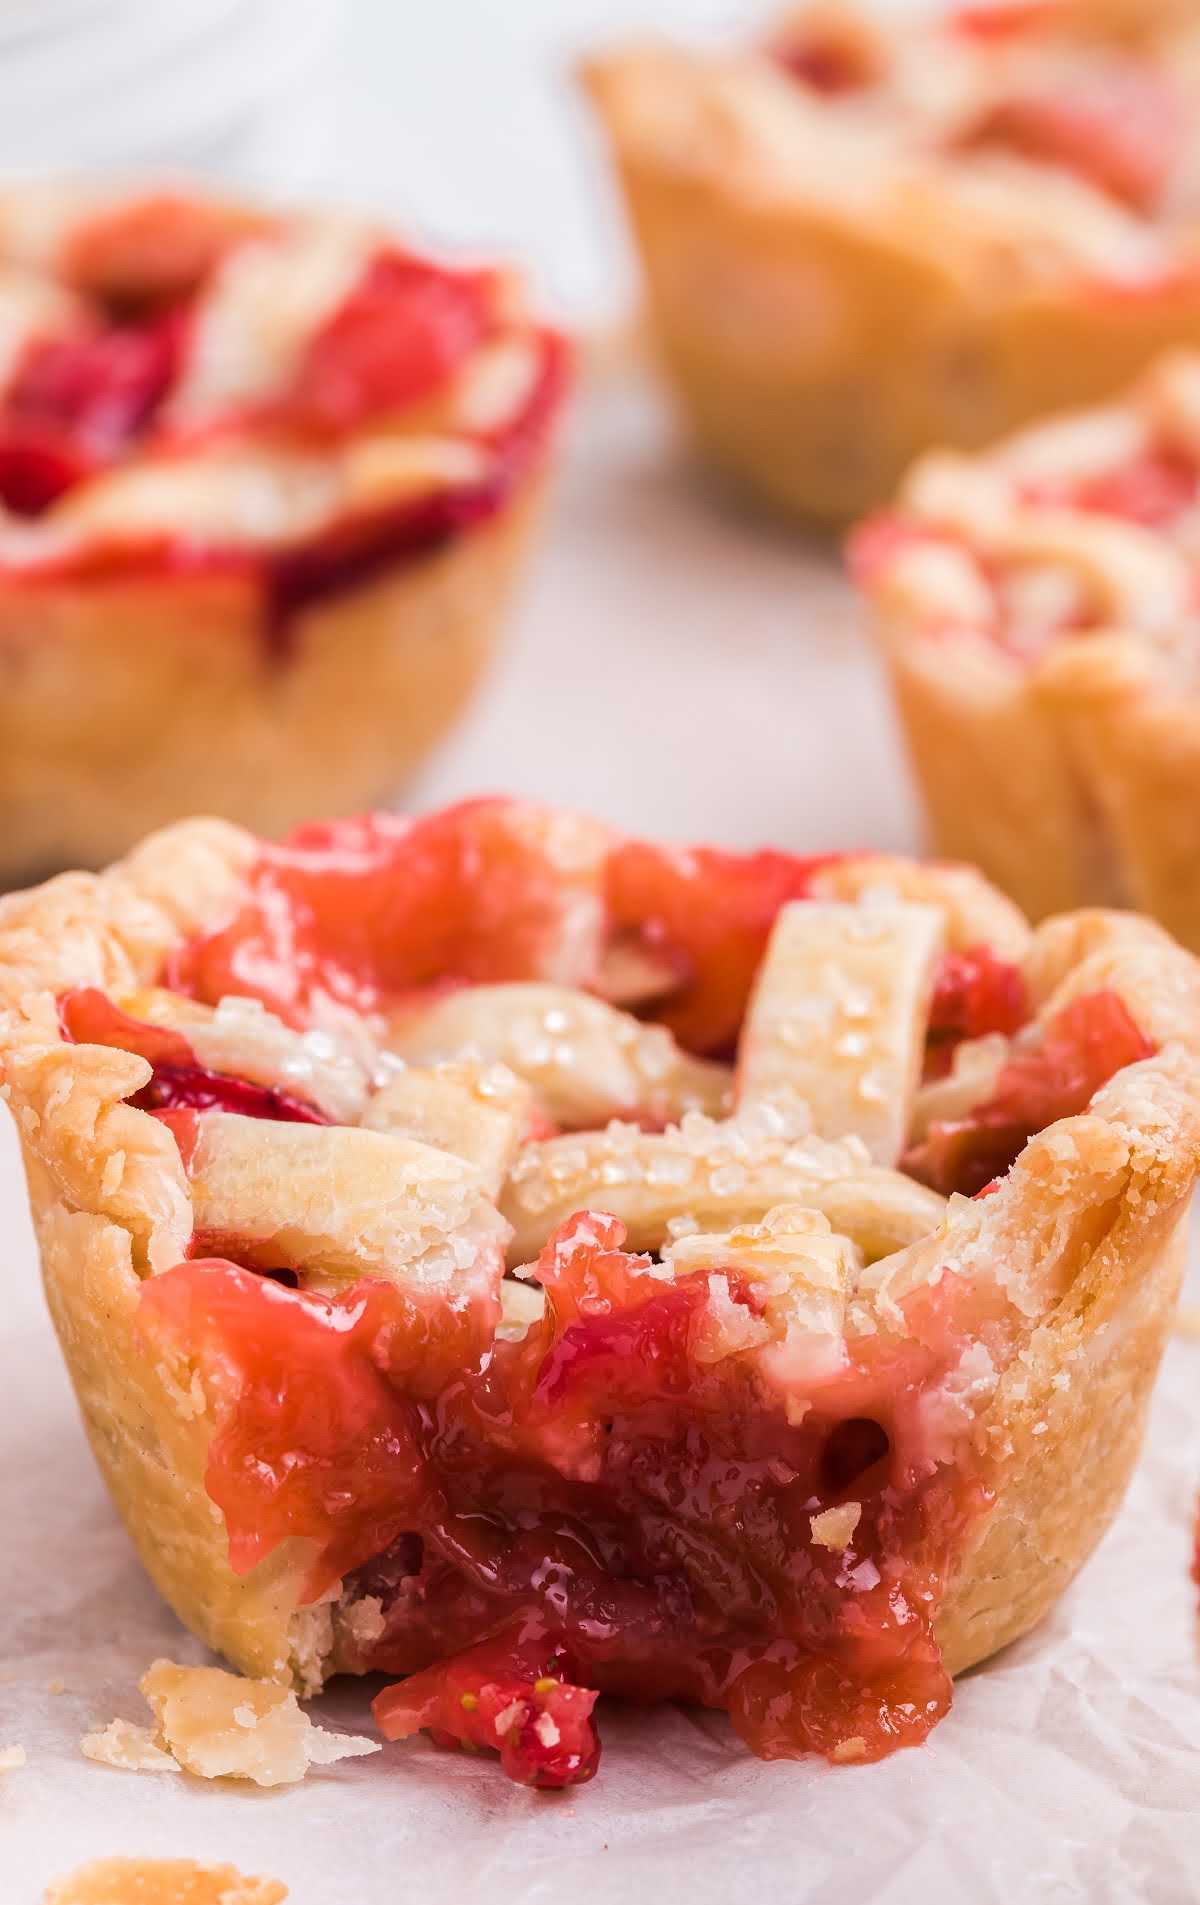 close up shot of a Mini Rhubarb and Strawberry Pies on a parchment paper